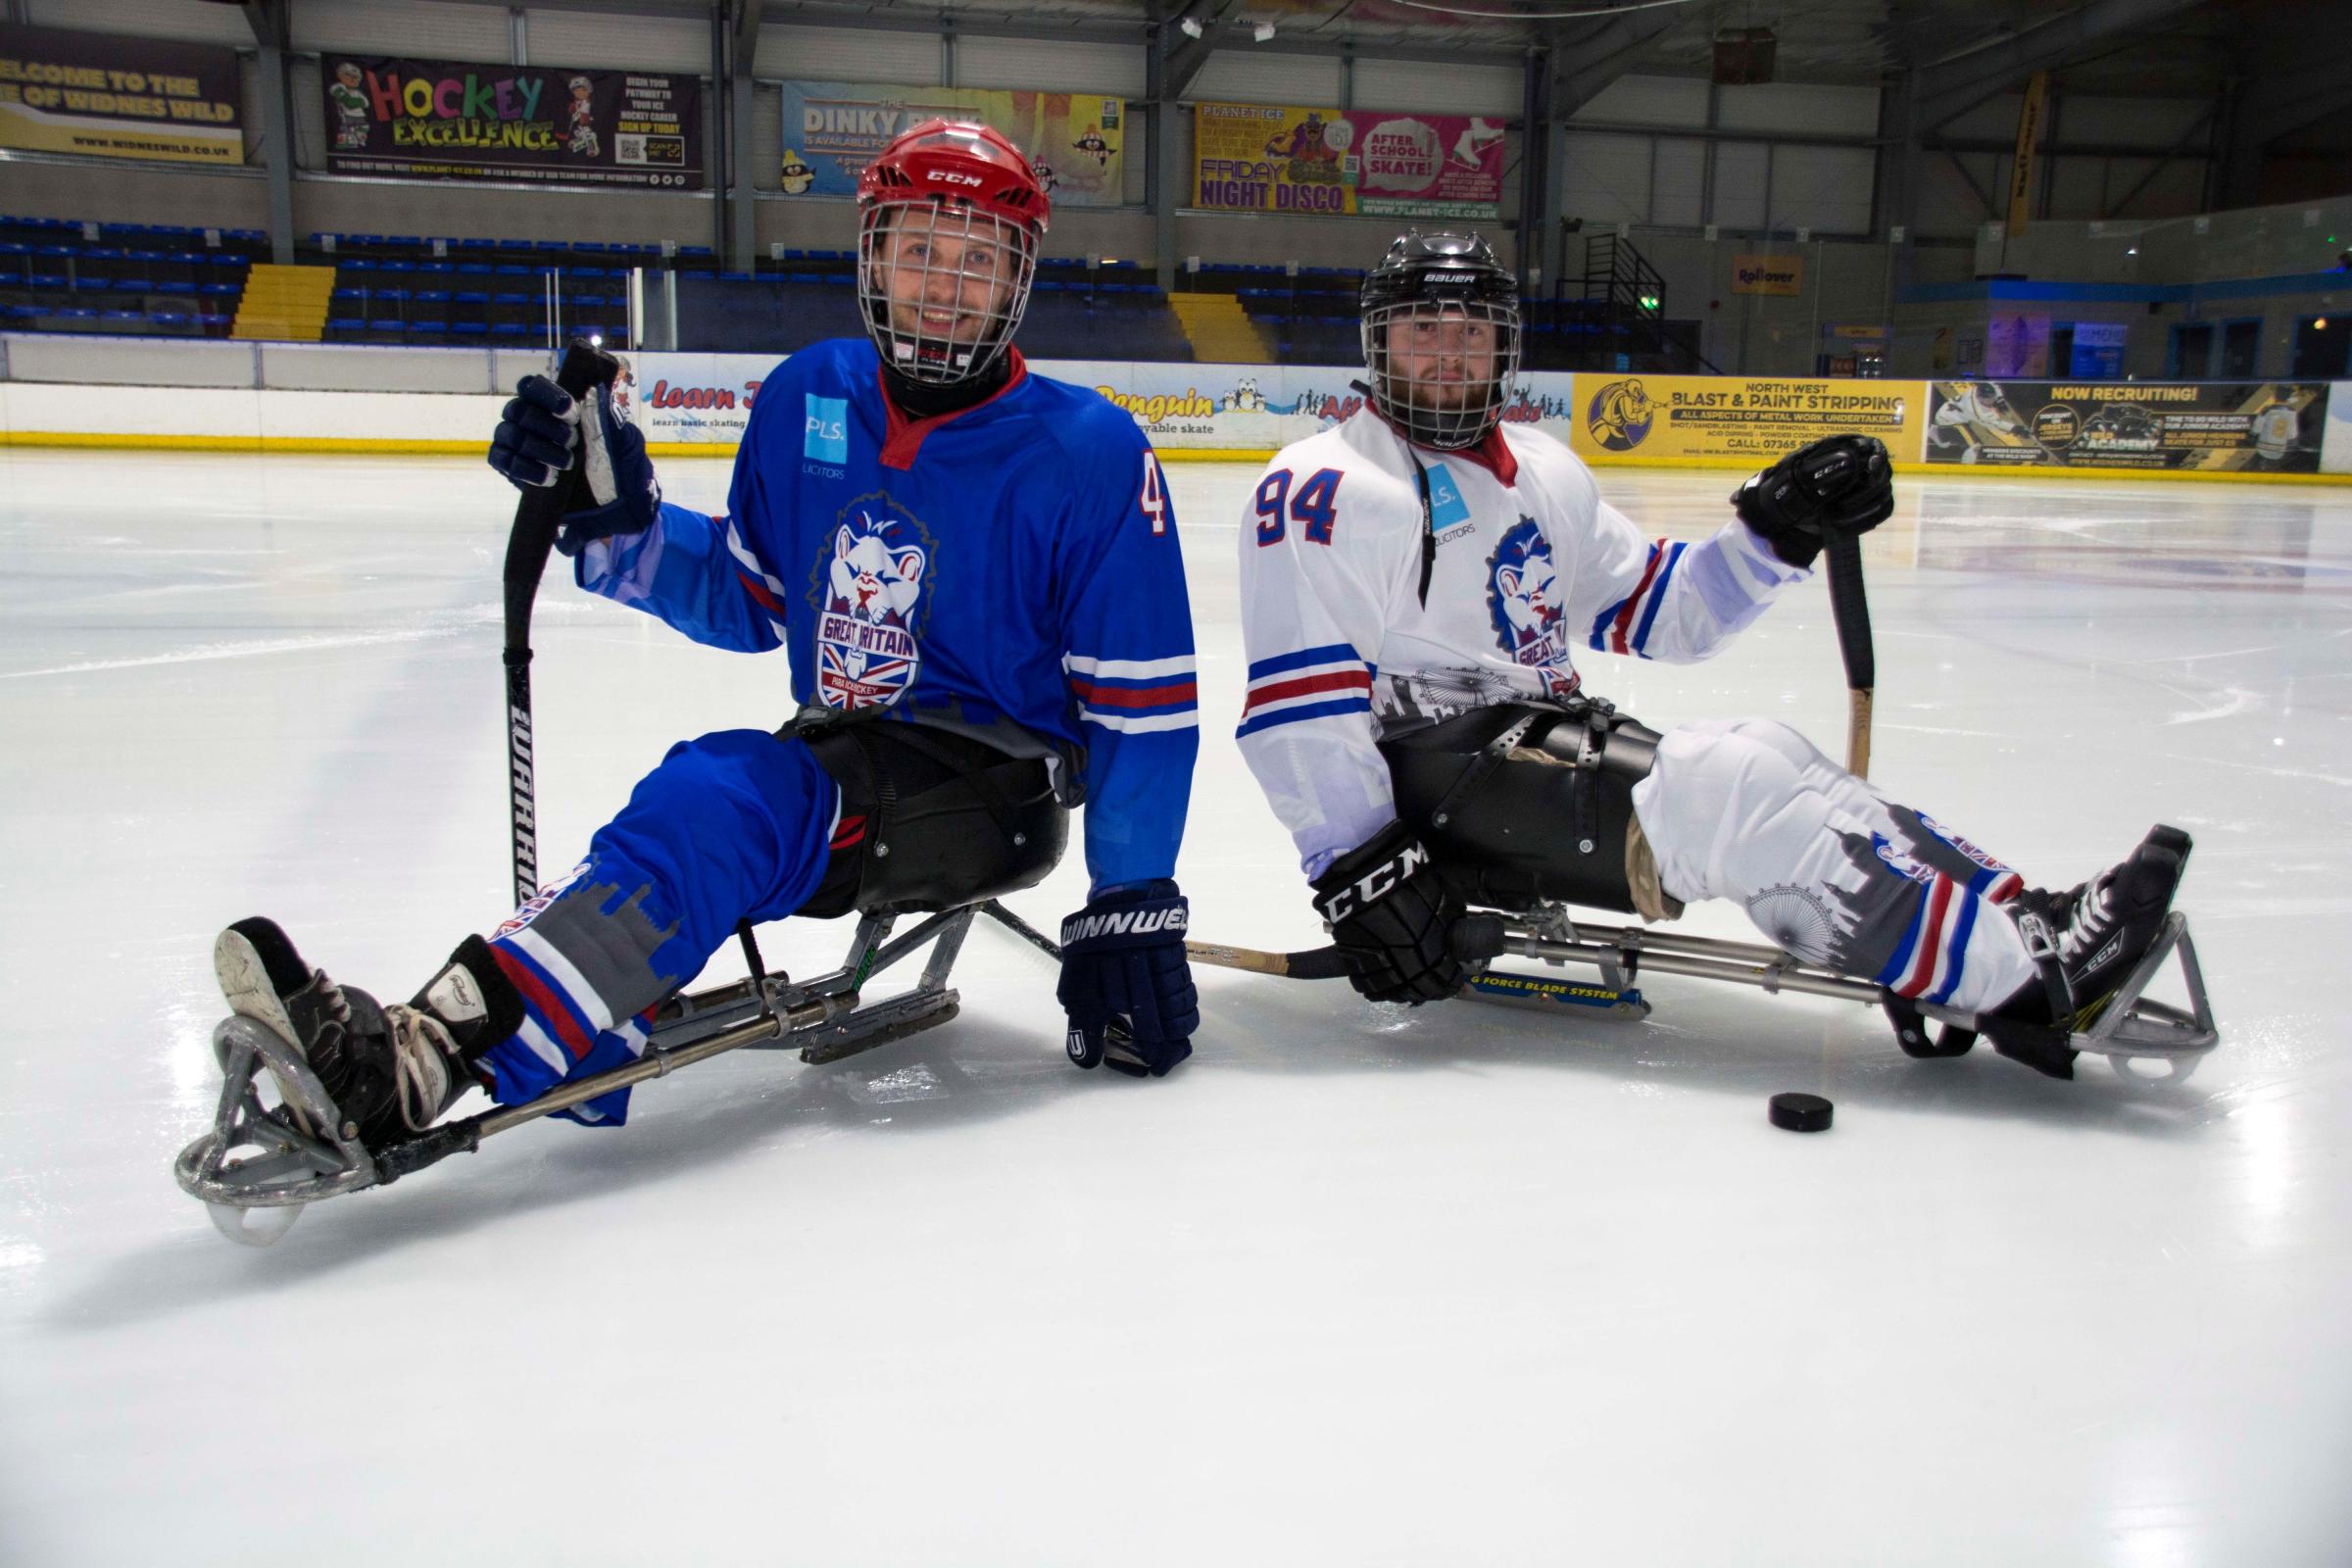 Solicitors to sponsor GB ice hockey team jerseys at world championships in Berlin - Messenger Newspapers